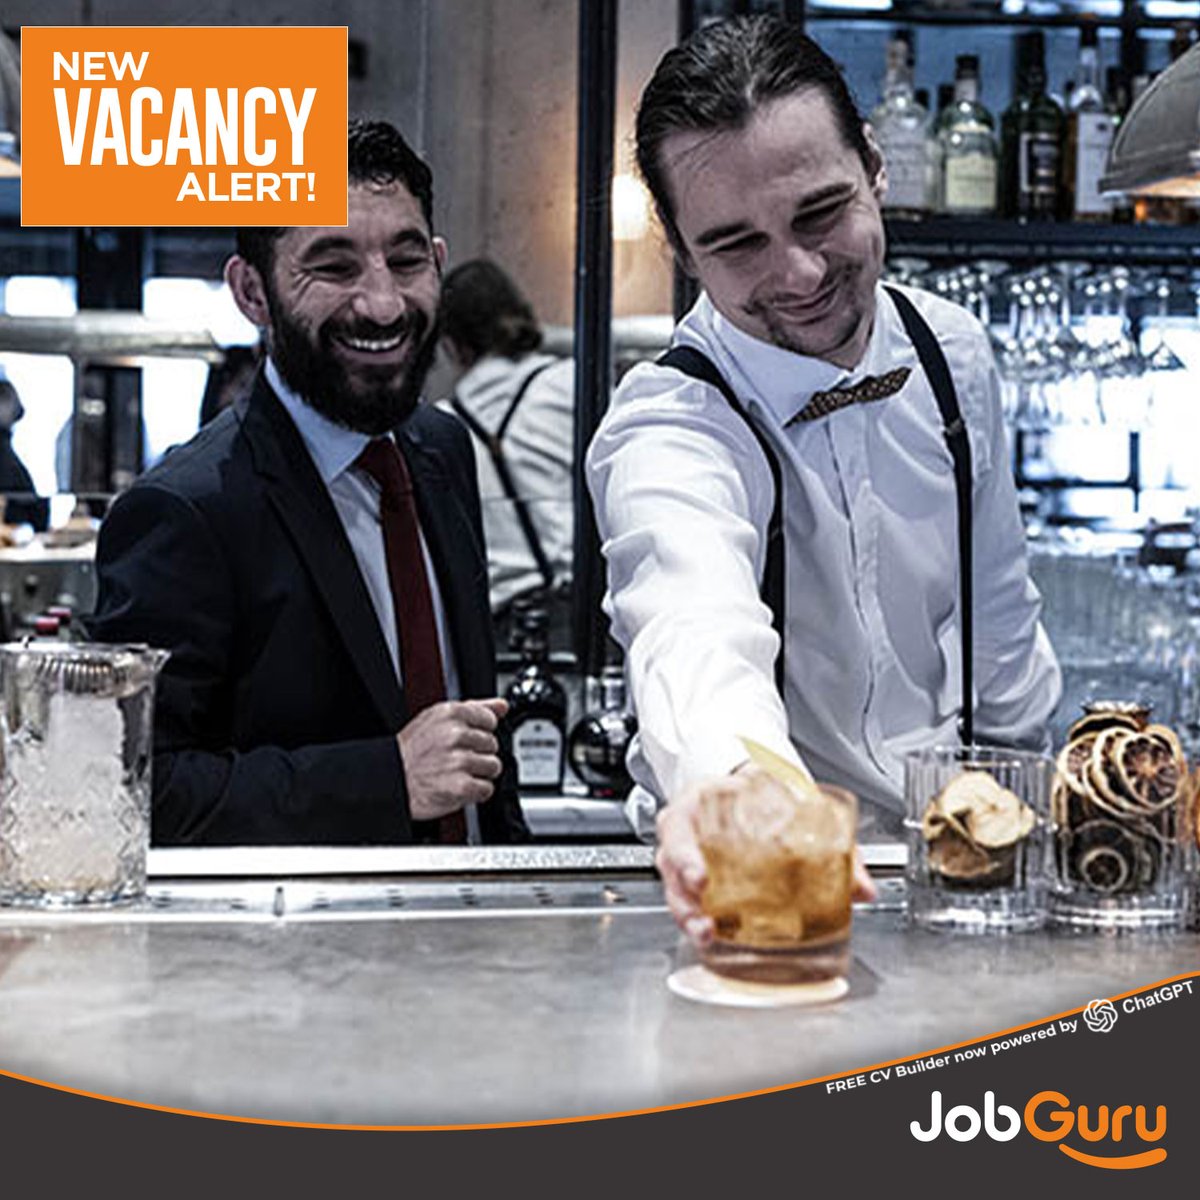 🍹 Seeking passionate Bartenders/Mixologists to craft unforgettable experiences for our guests at The Doyle Collection's Sidecar Bar in Dublin! Generous perks and endless opportunities for growth! Apply now! #HospitalityJobs #Dublin #Mixology 🎉✨jobguru.ie/vacancy/barten…